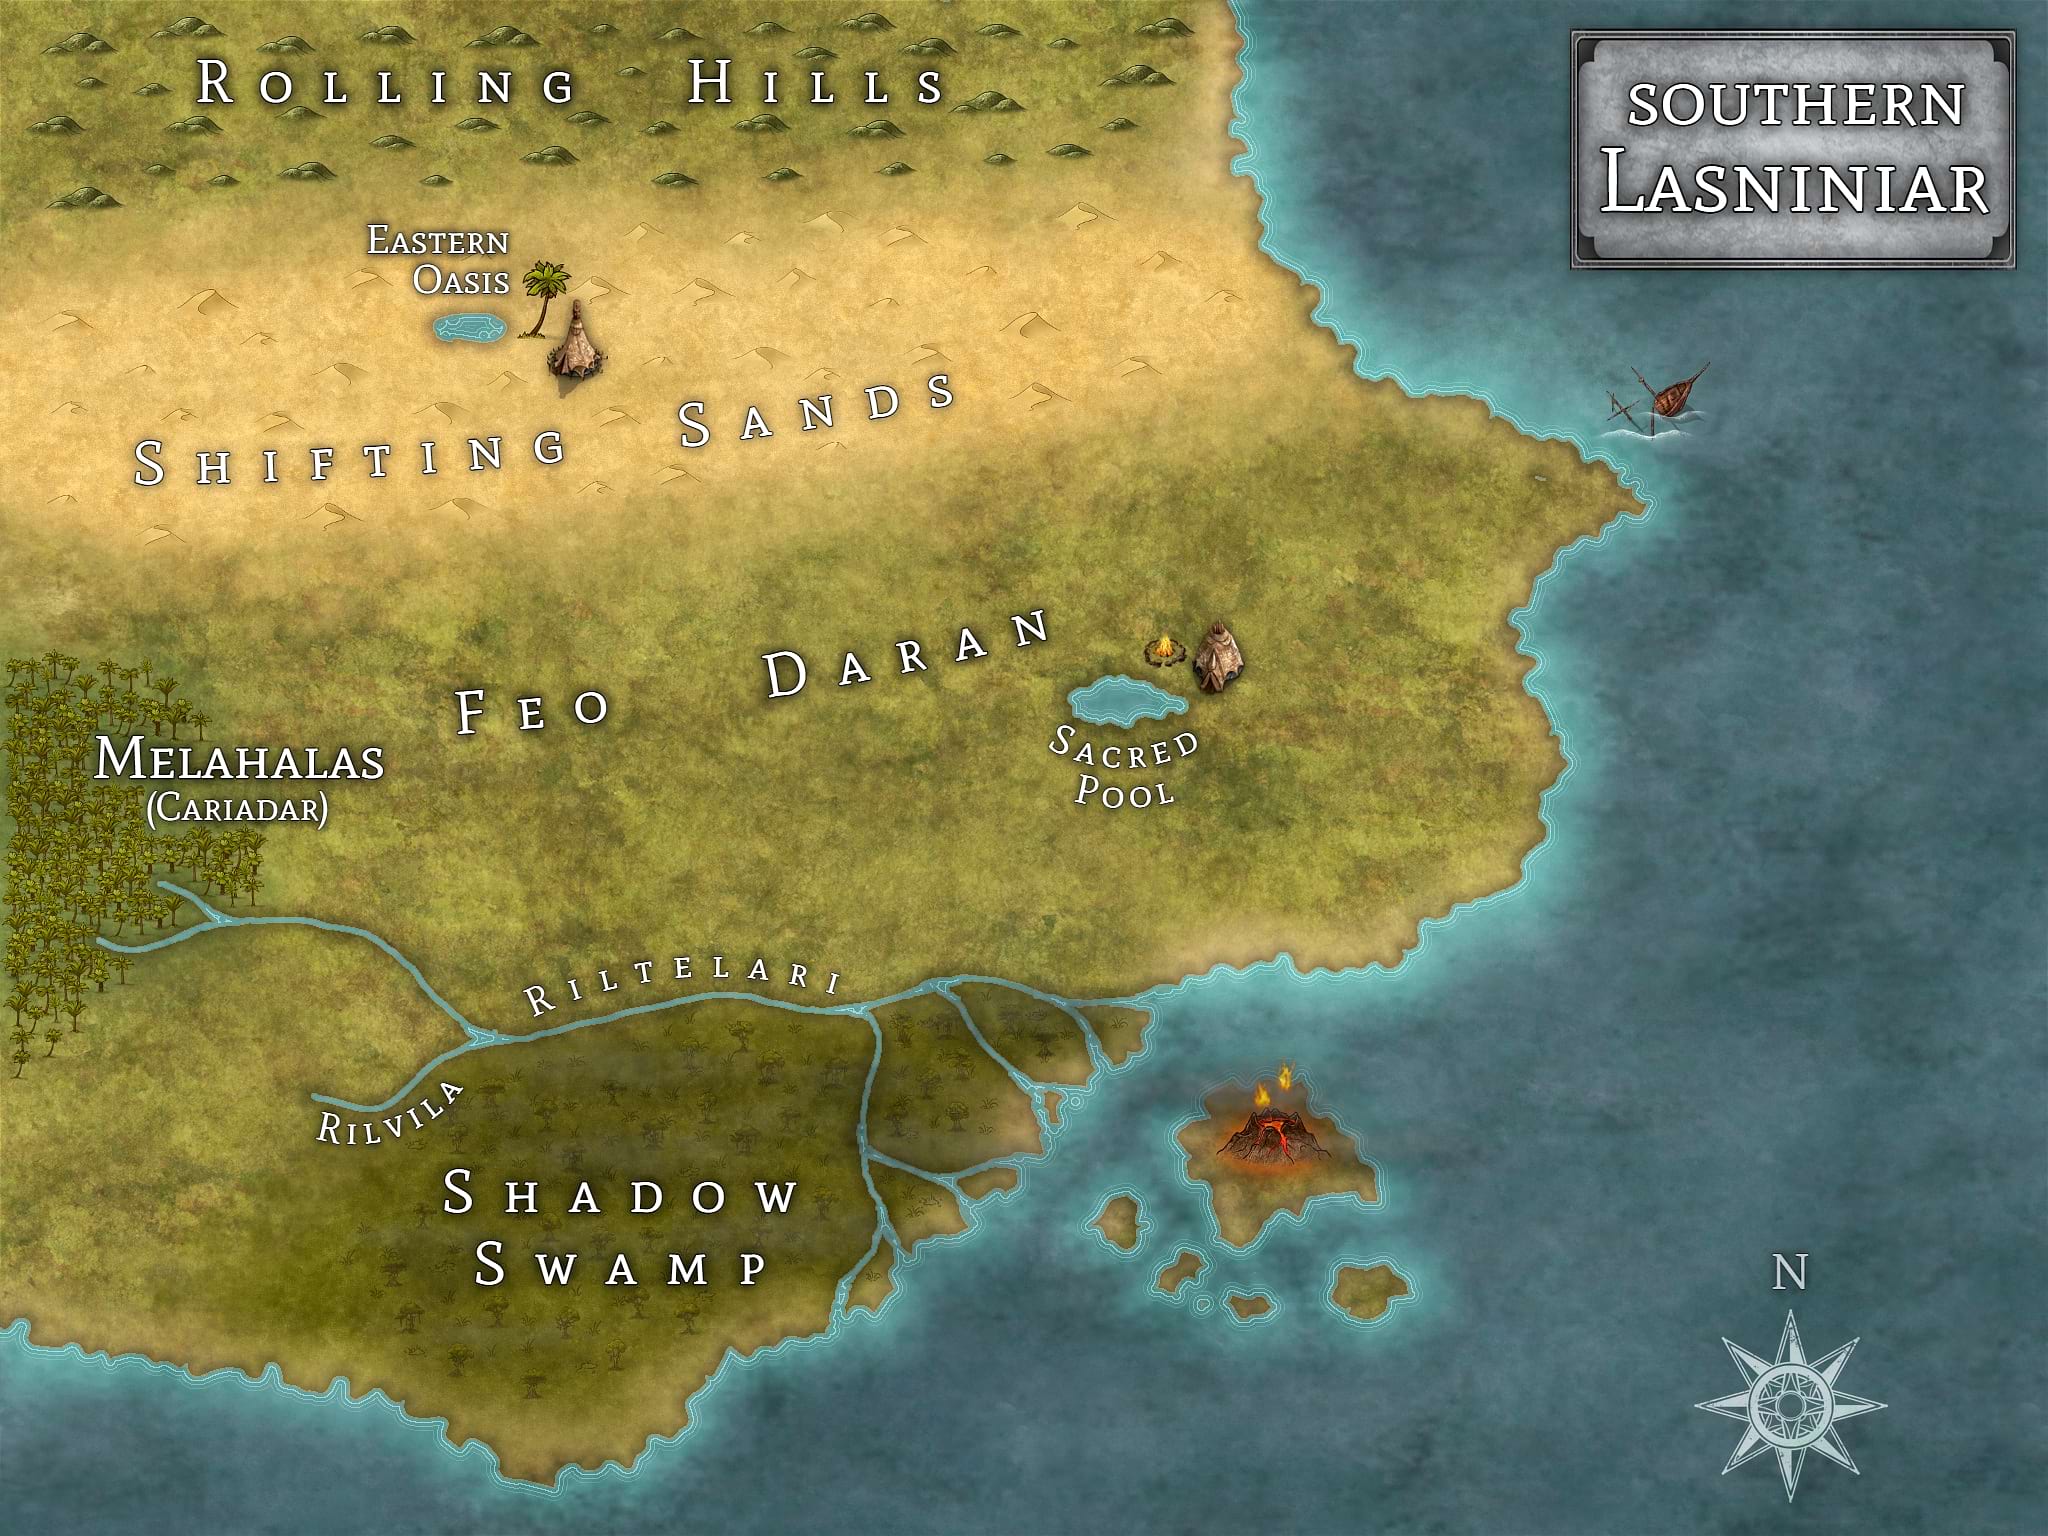 Map of Southern Lasniniar from the World of Lasniniar epic fantasy series